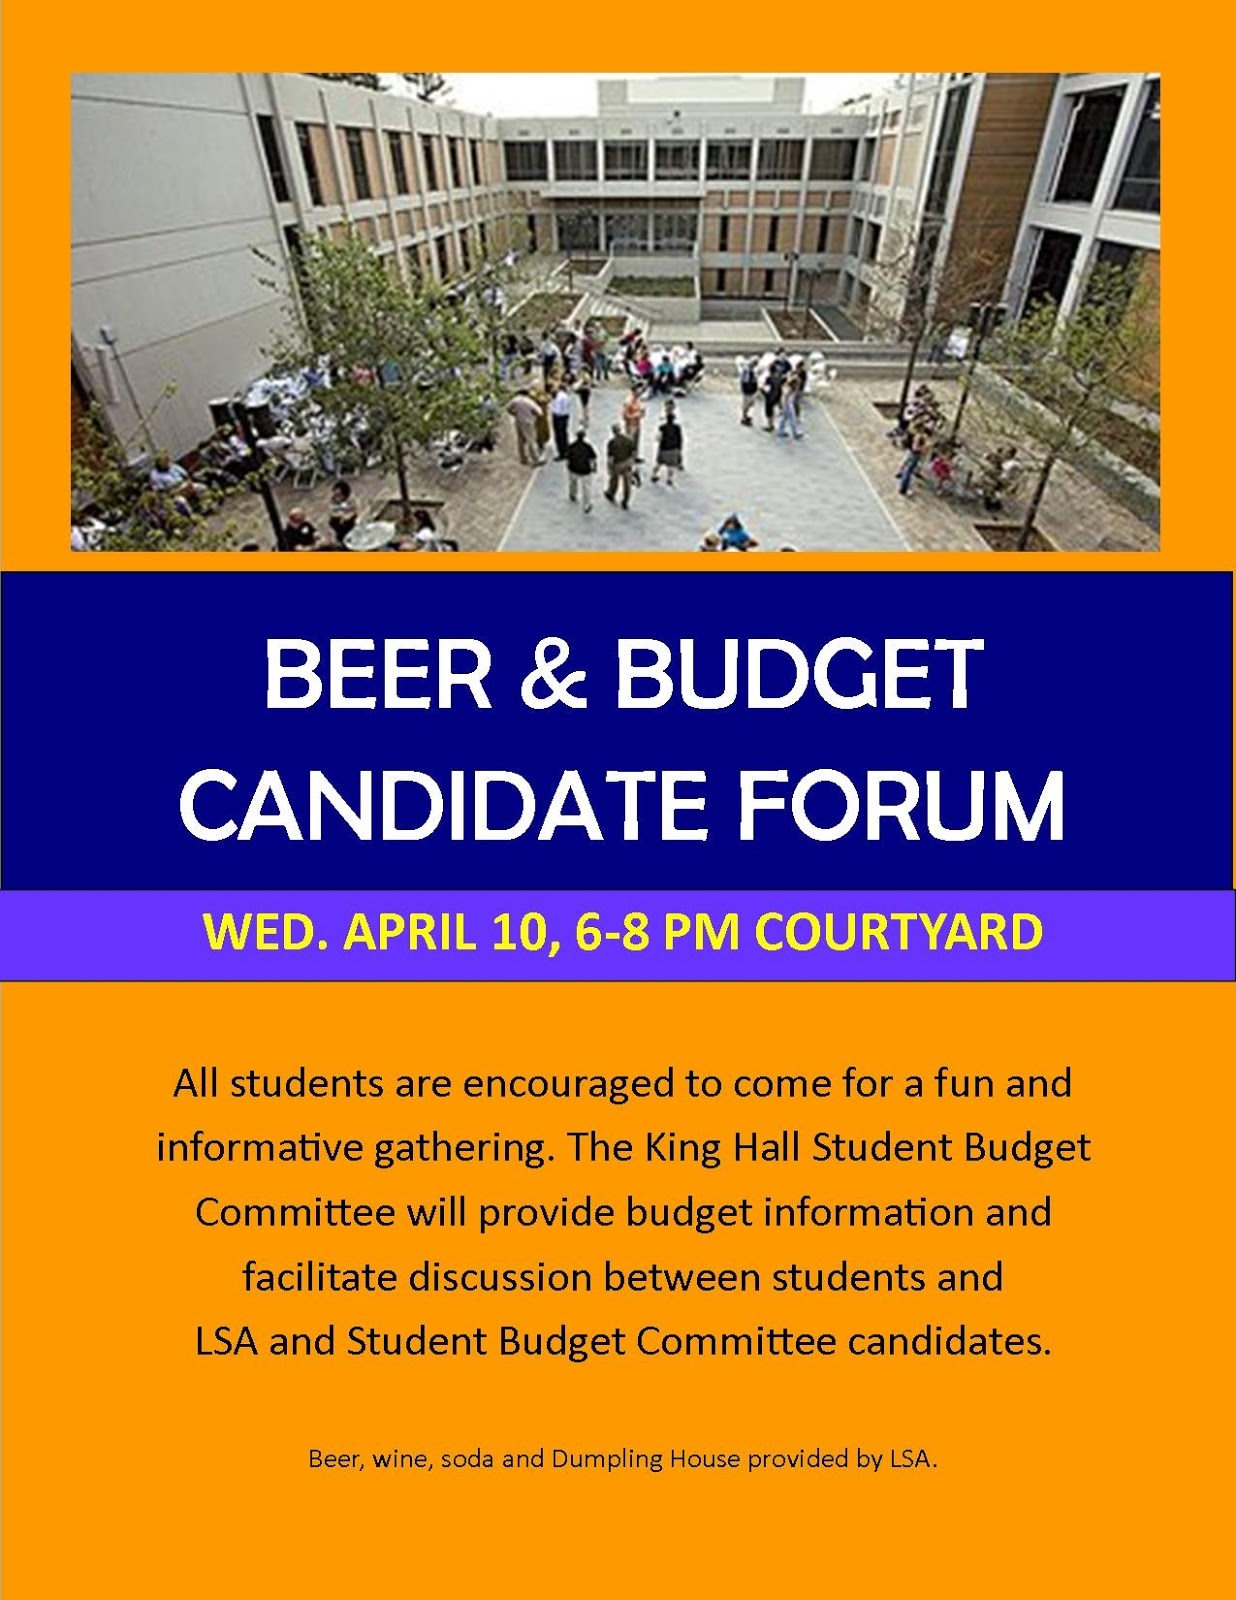 Beer and Budget Forum